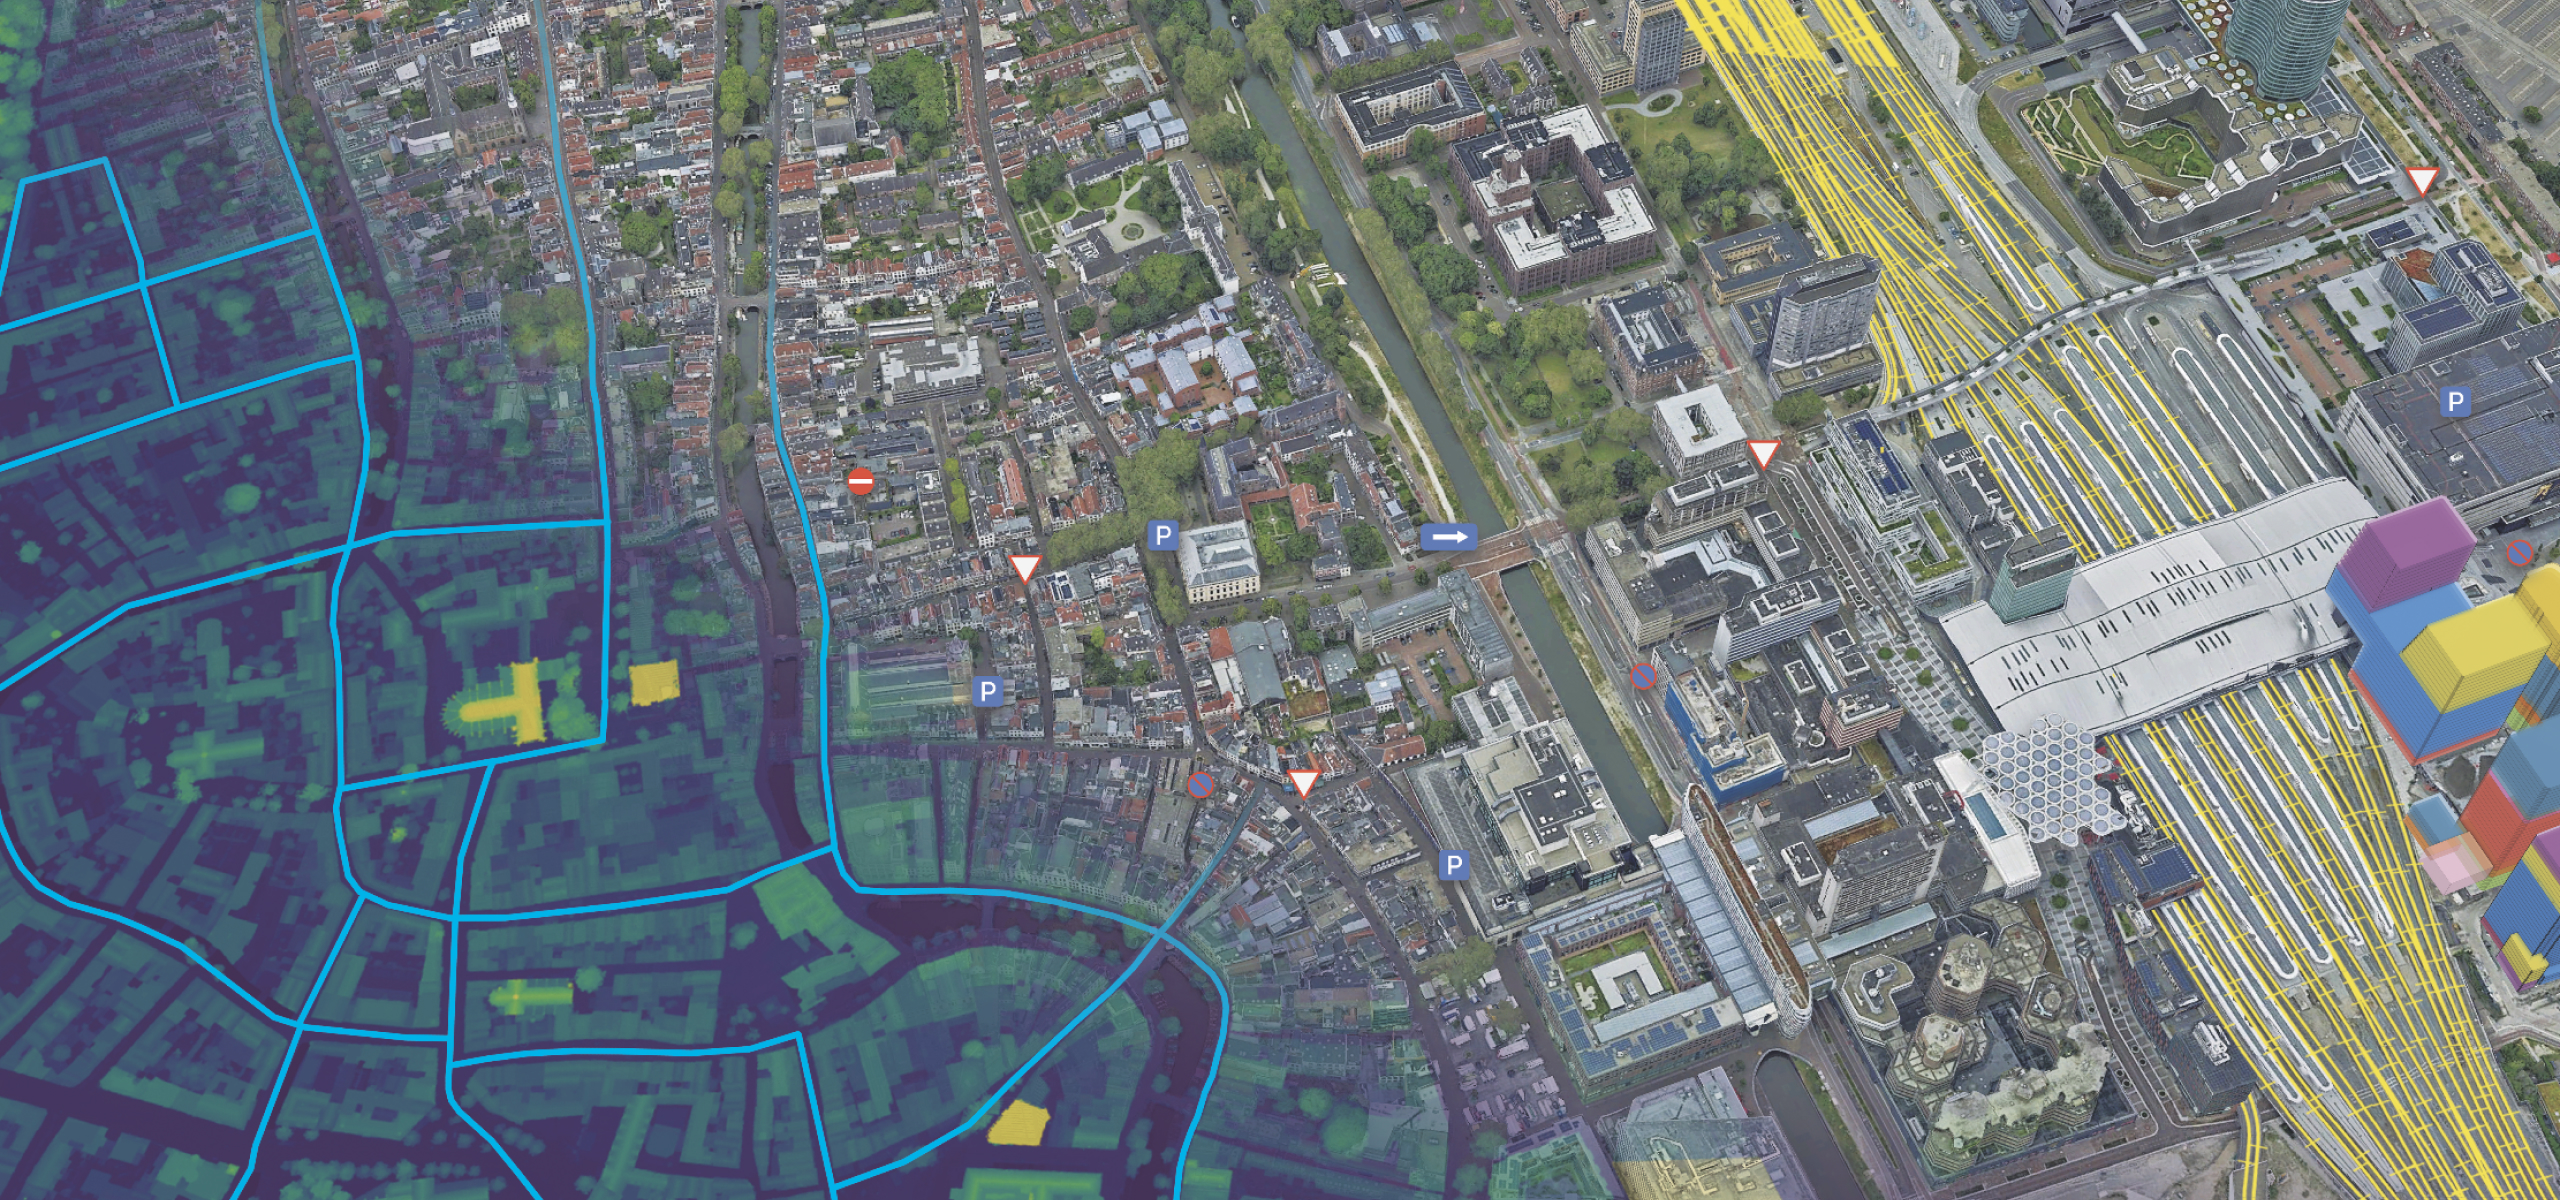 3D mesh of a city showing buildings, roads, and green land overlayed with underground data and street data layers 